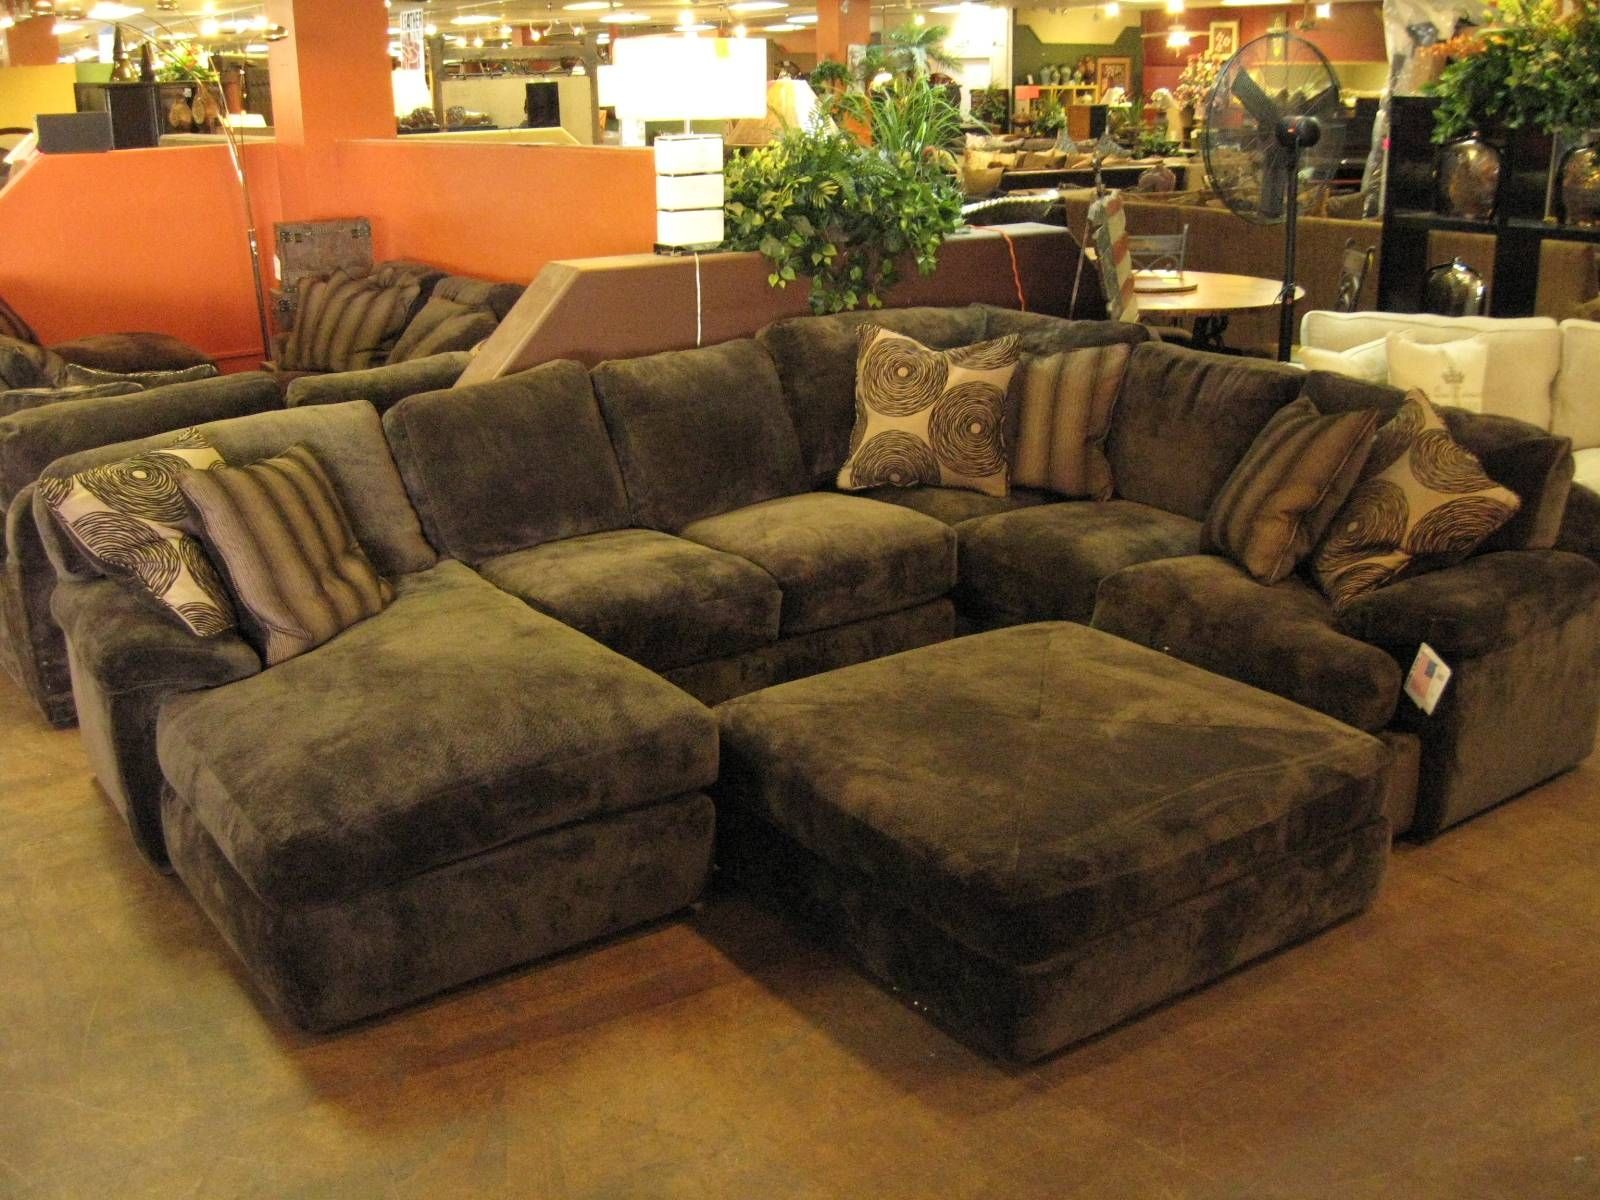 Sofas Center : Excellent Down Sectional Sofa Images Concept With Regarding Goose Down Sectional Sofas (Photo 10 of 15)